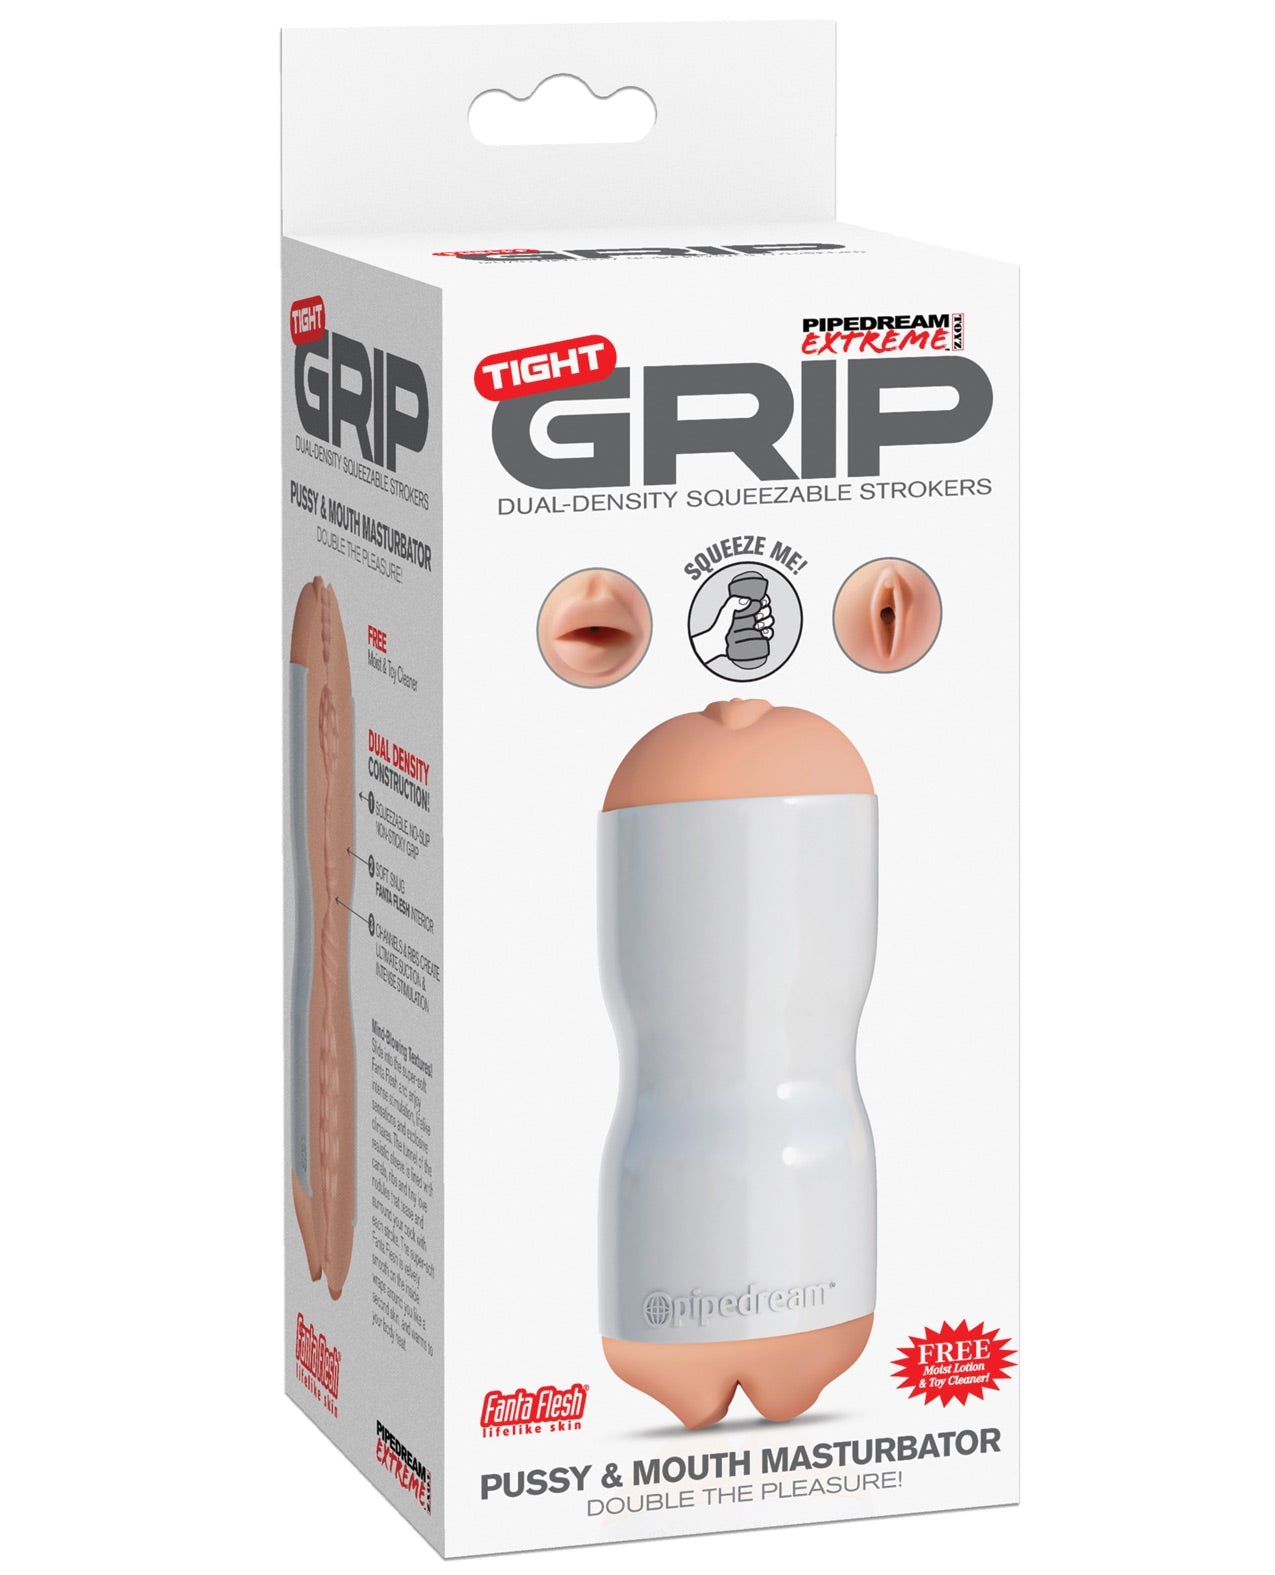 PDX Extreme Tight Grip Squeezable Strokers - Pussy & Mouth